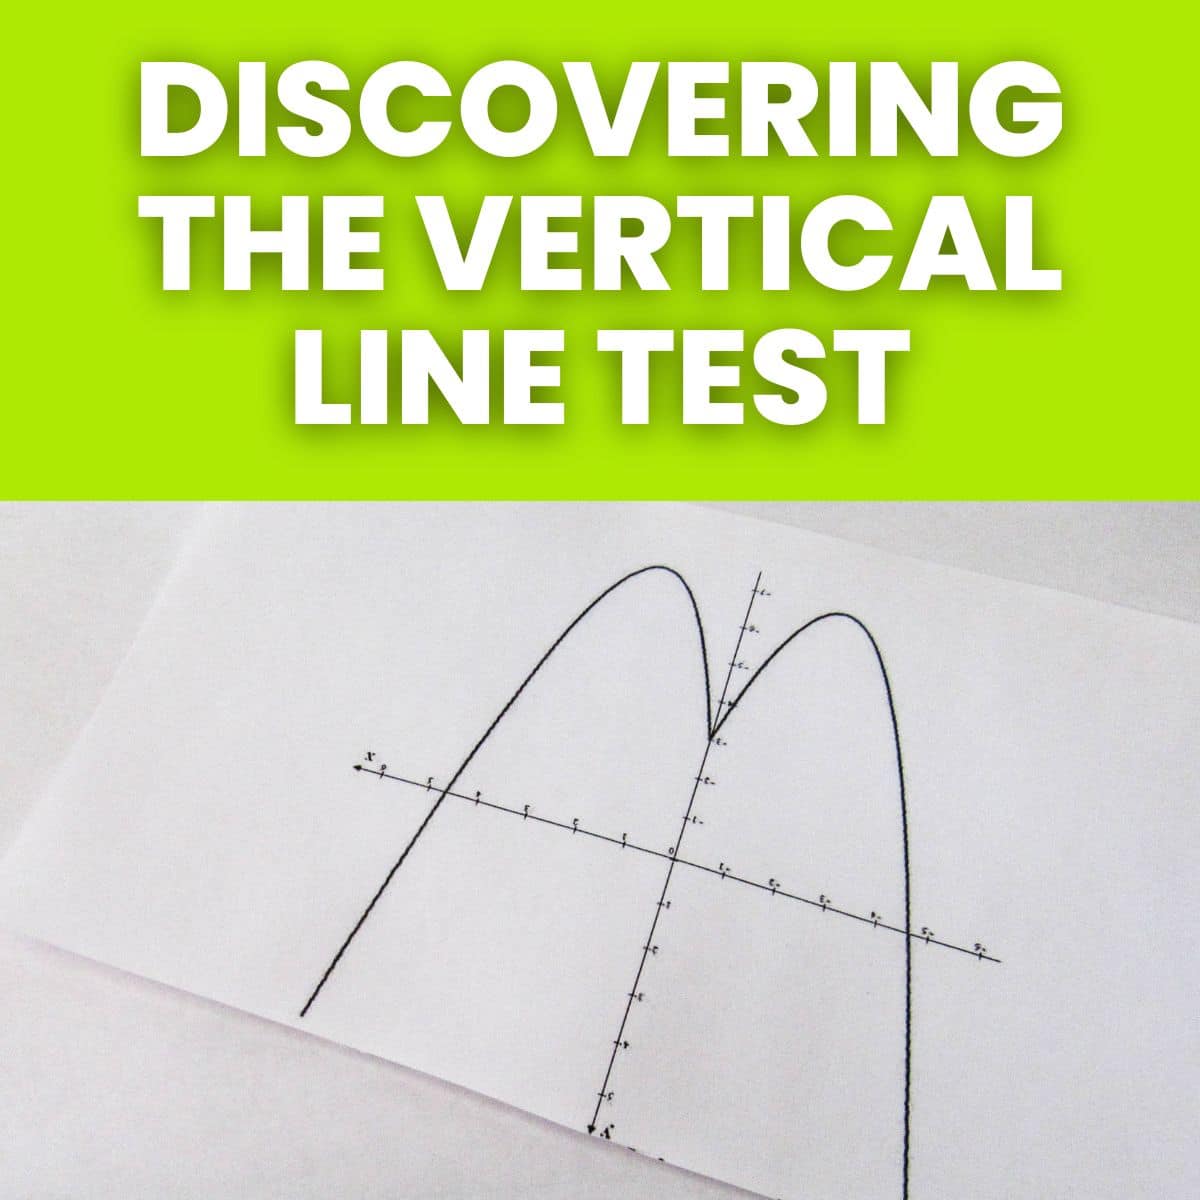 drawing of a function graph with text "discovering the vertical line test" 